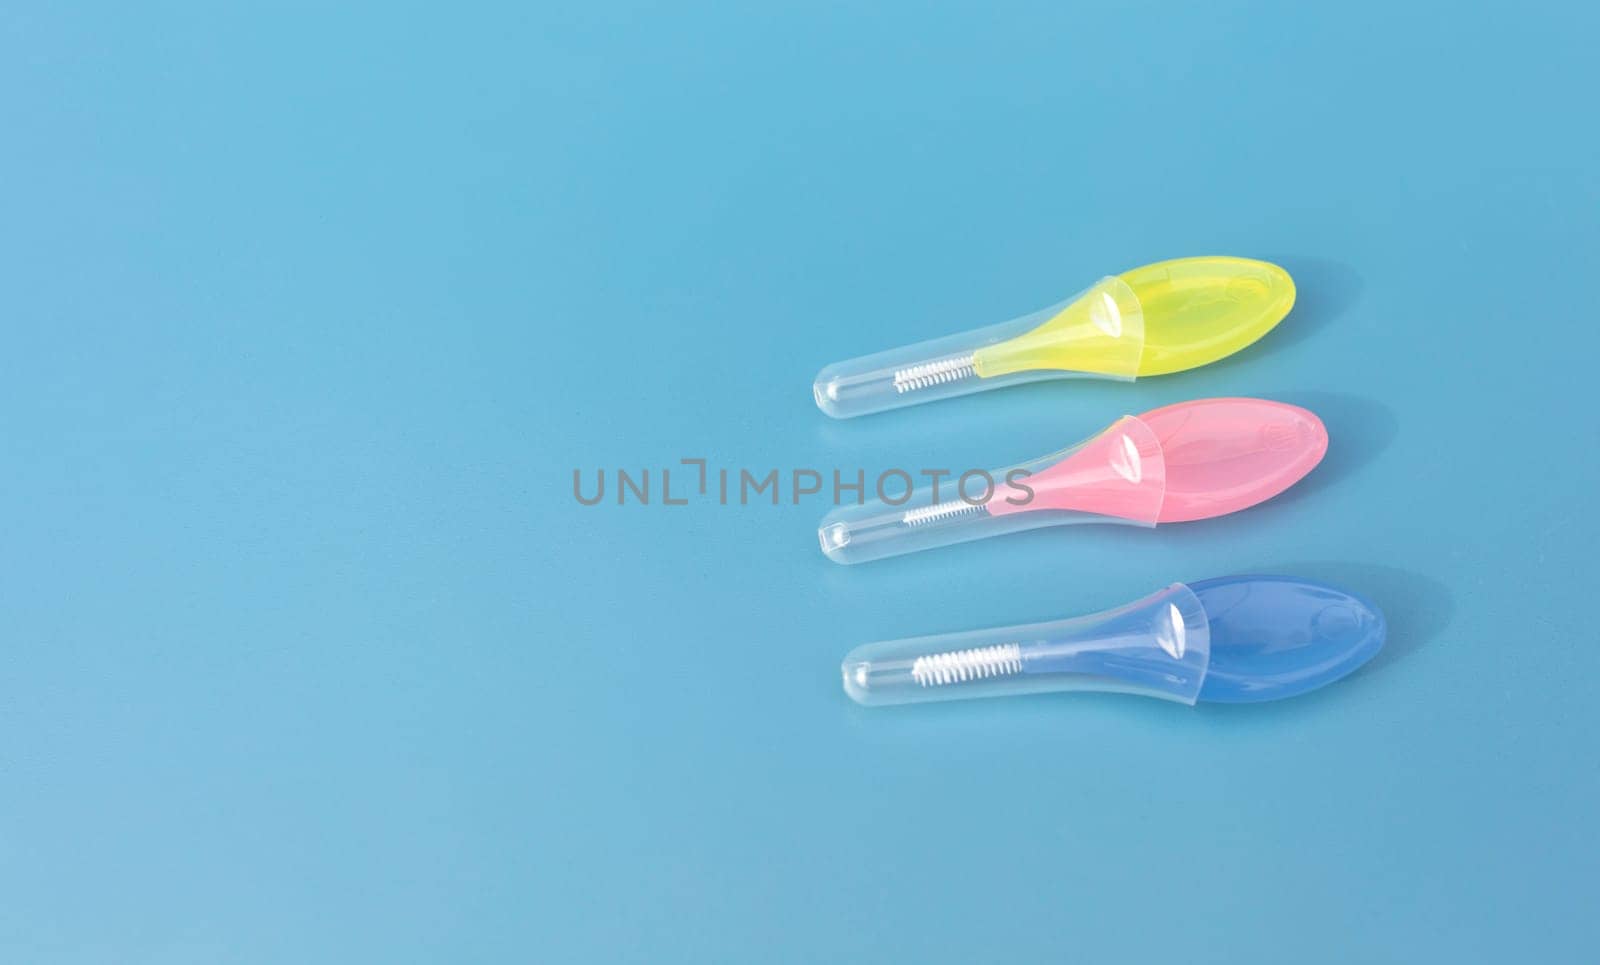 Mockup Colorful Interdental Toothbrush For Cleaning Between Teeth On Blue Background . Toothpick With Soft Bristles, Oral Tooth Cleaning Tool. Horizontal, Copy Space For Text. Dental And Orthodontic by netatsi